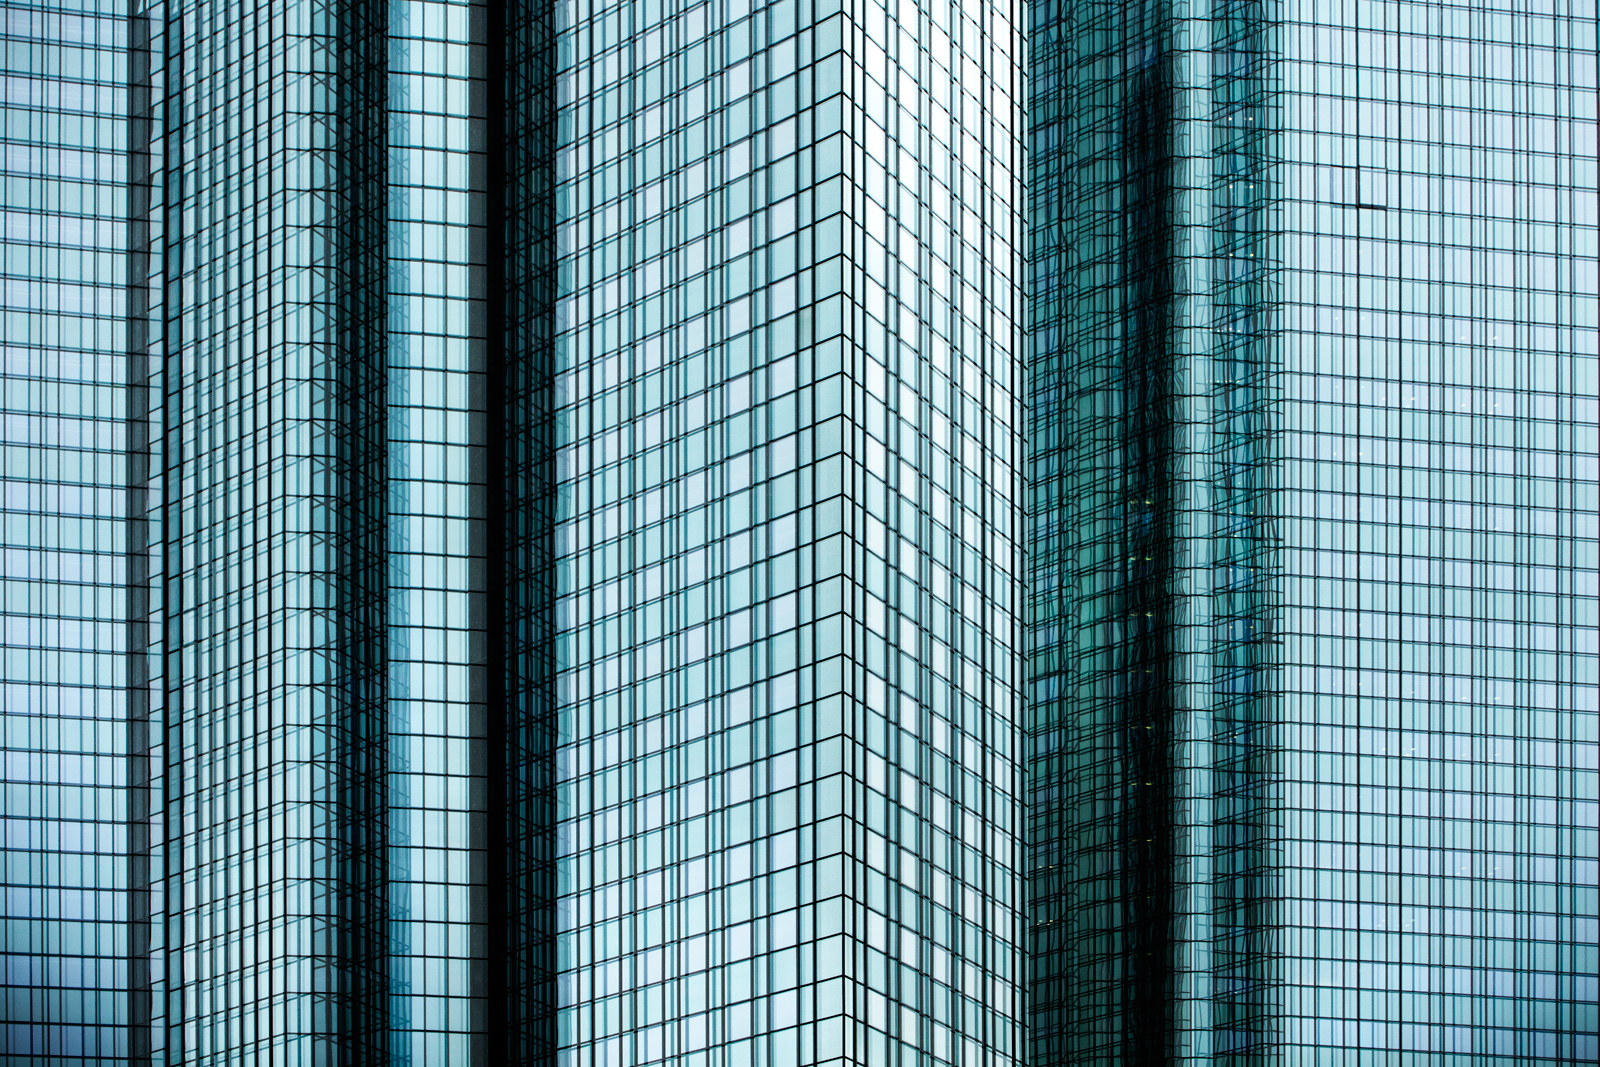 Carsten Witte Deconstructs Frankfurt in Dizzying Architectural Photography